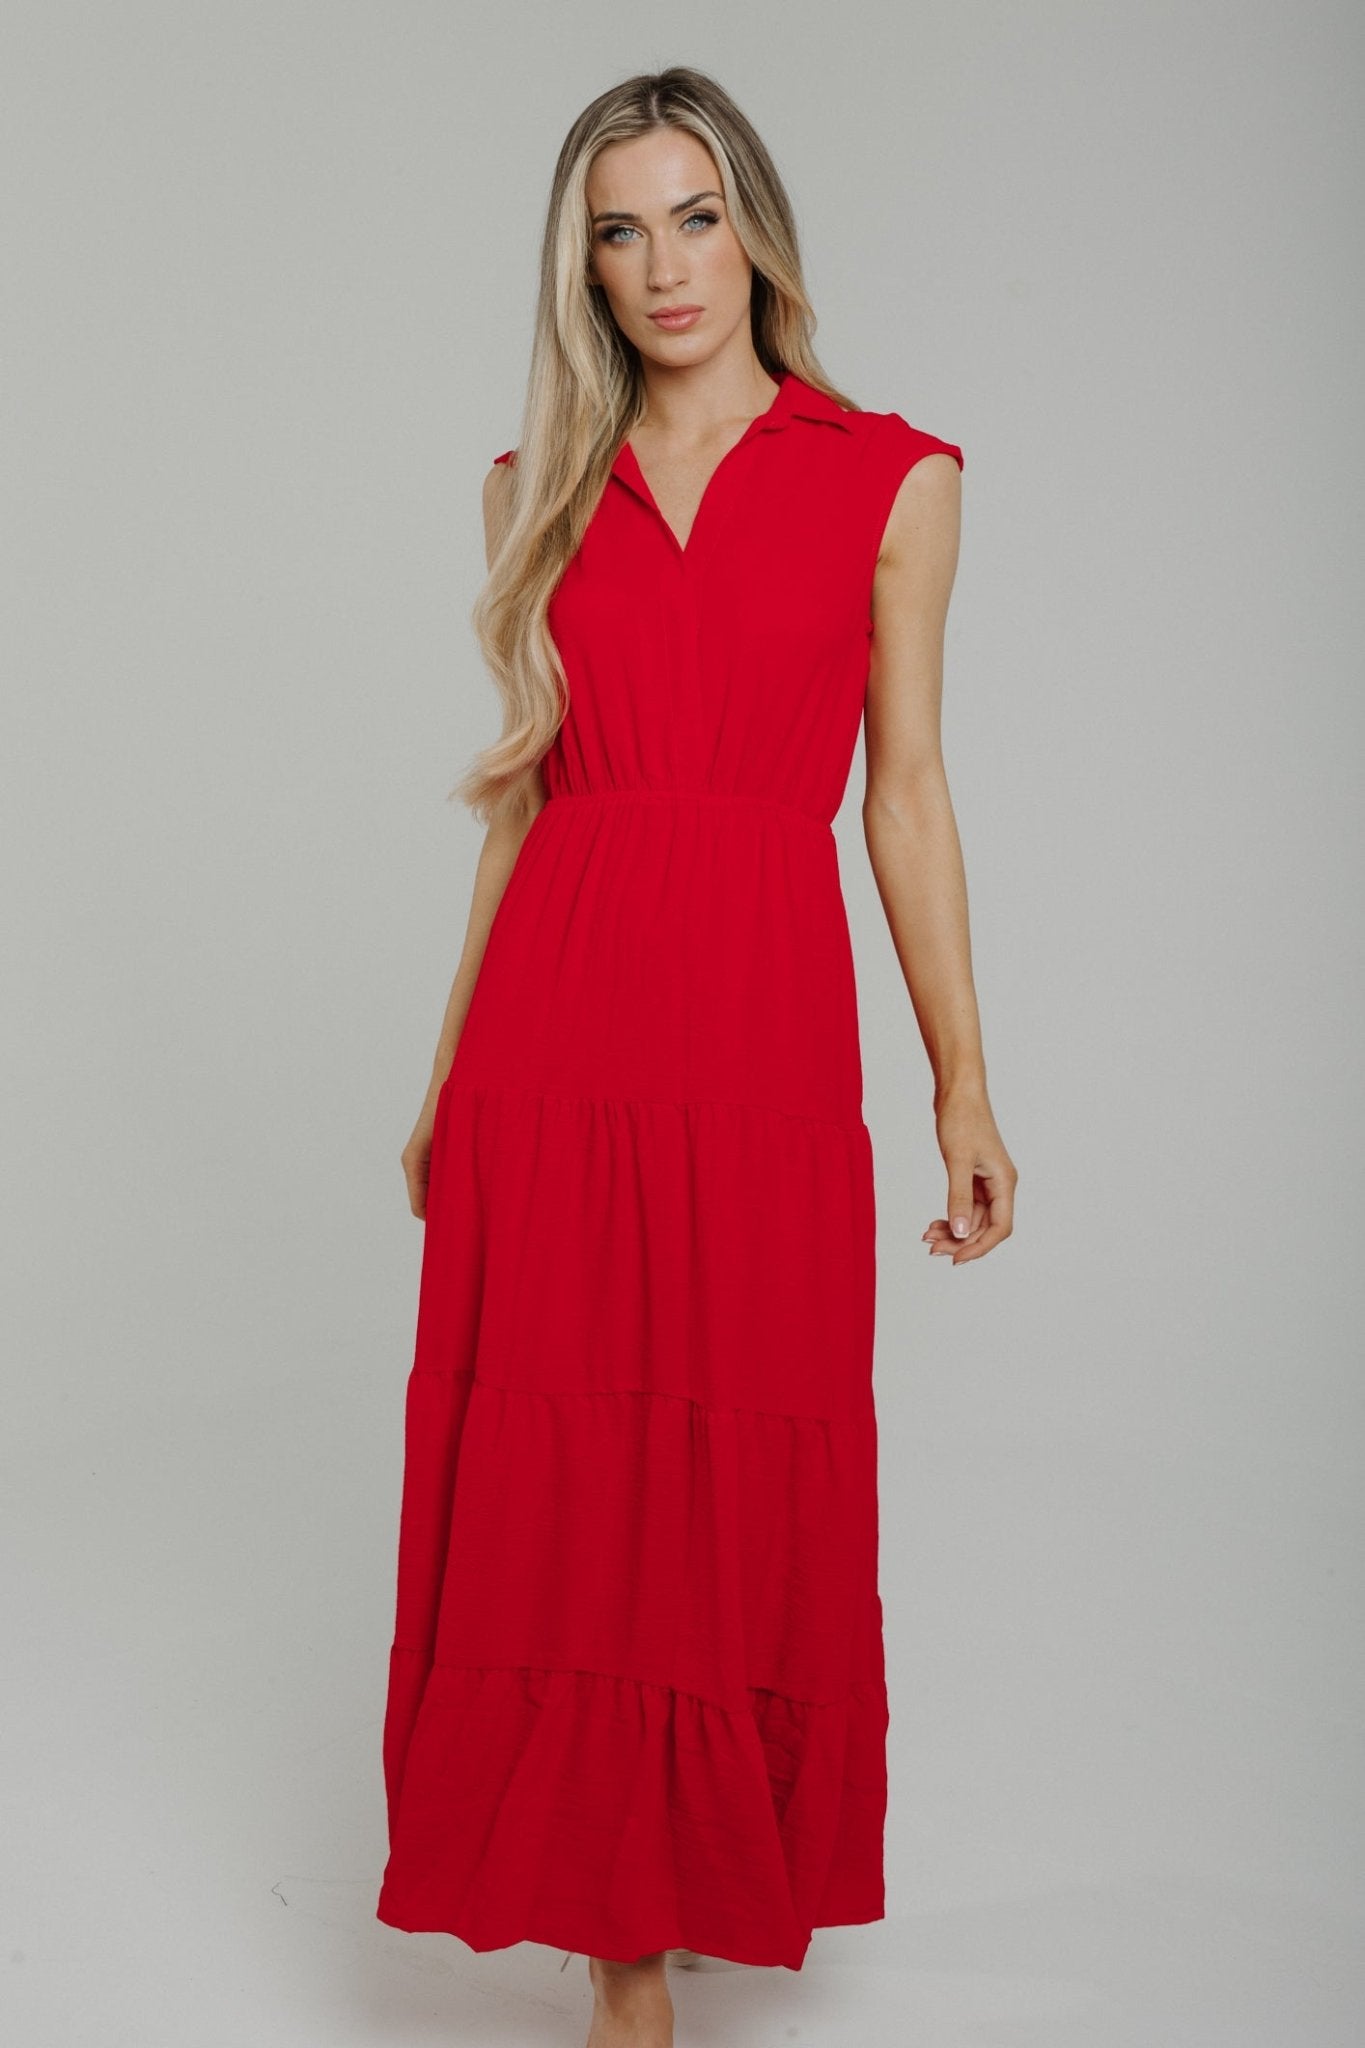 Willow Tiered Maxi Dress In Red - The Walk in Wardrobe